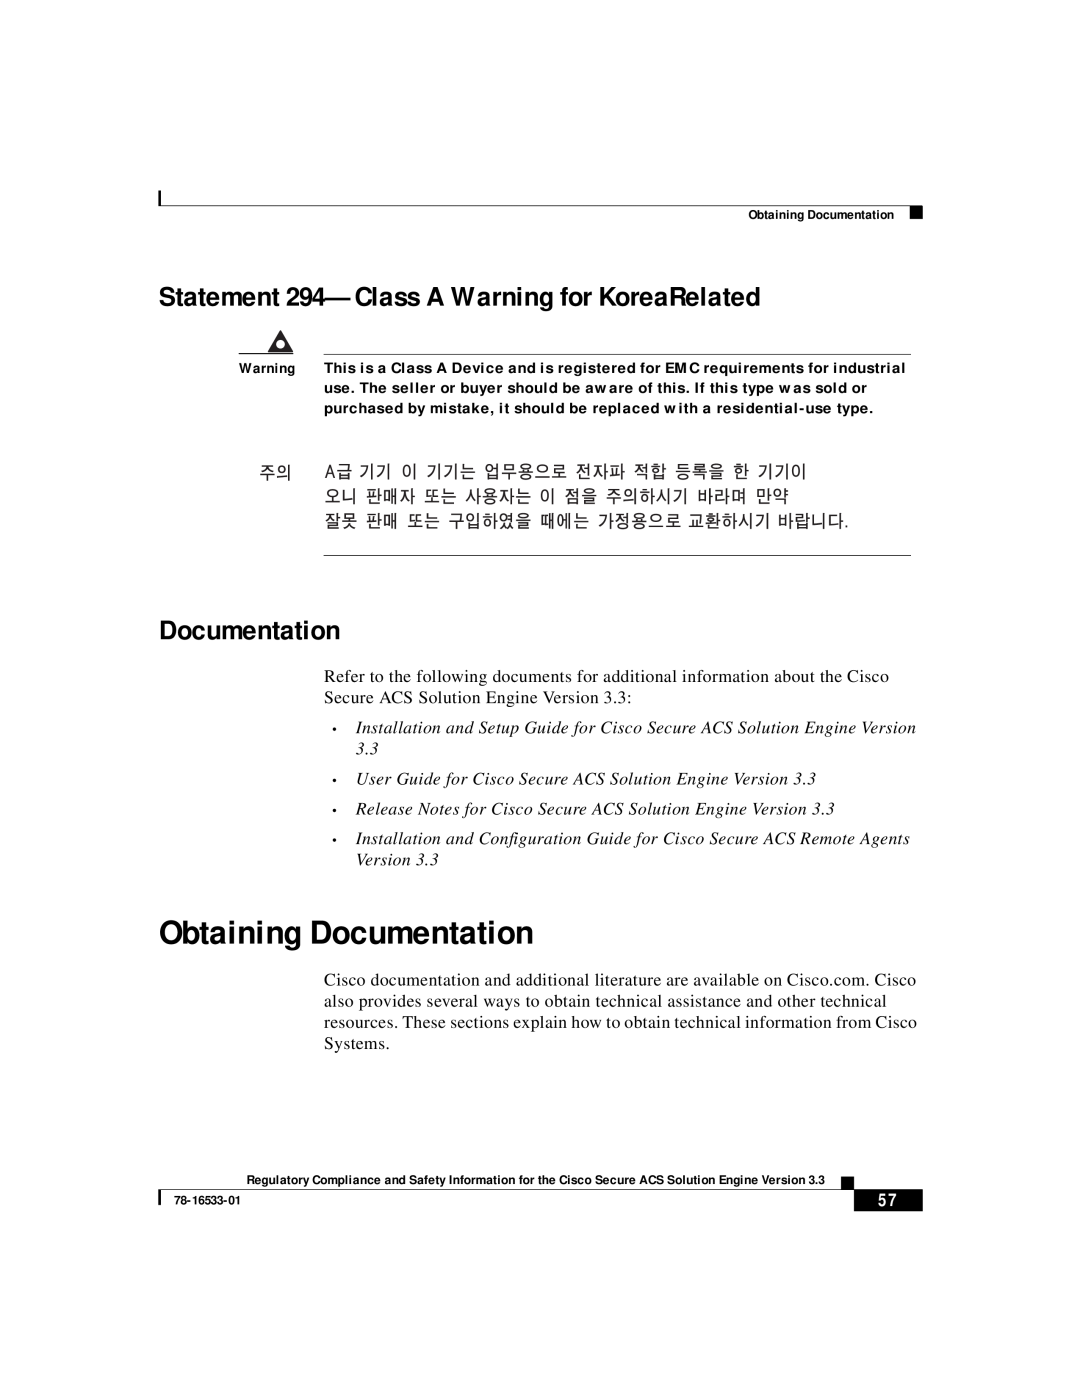 Cisco Systems CSACSE-1112-K9 manual Obtaining Documentation, Statement 294-Class A Warning for KoreaRelated 